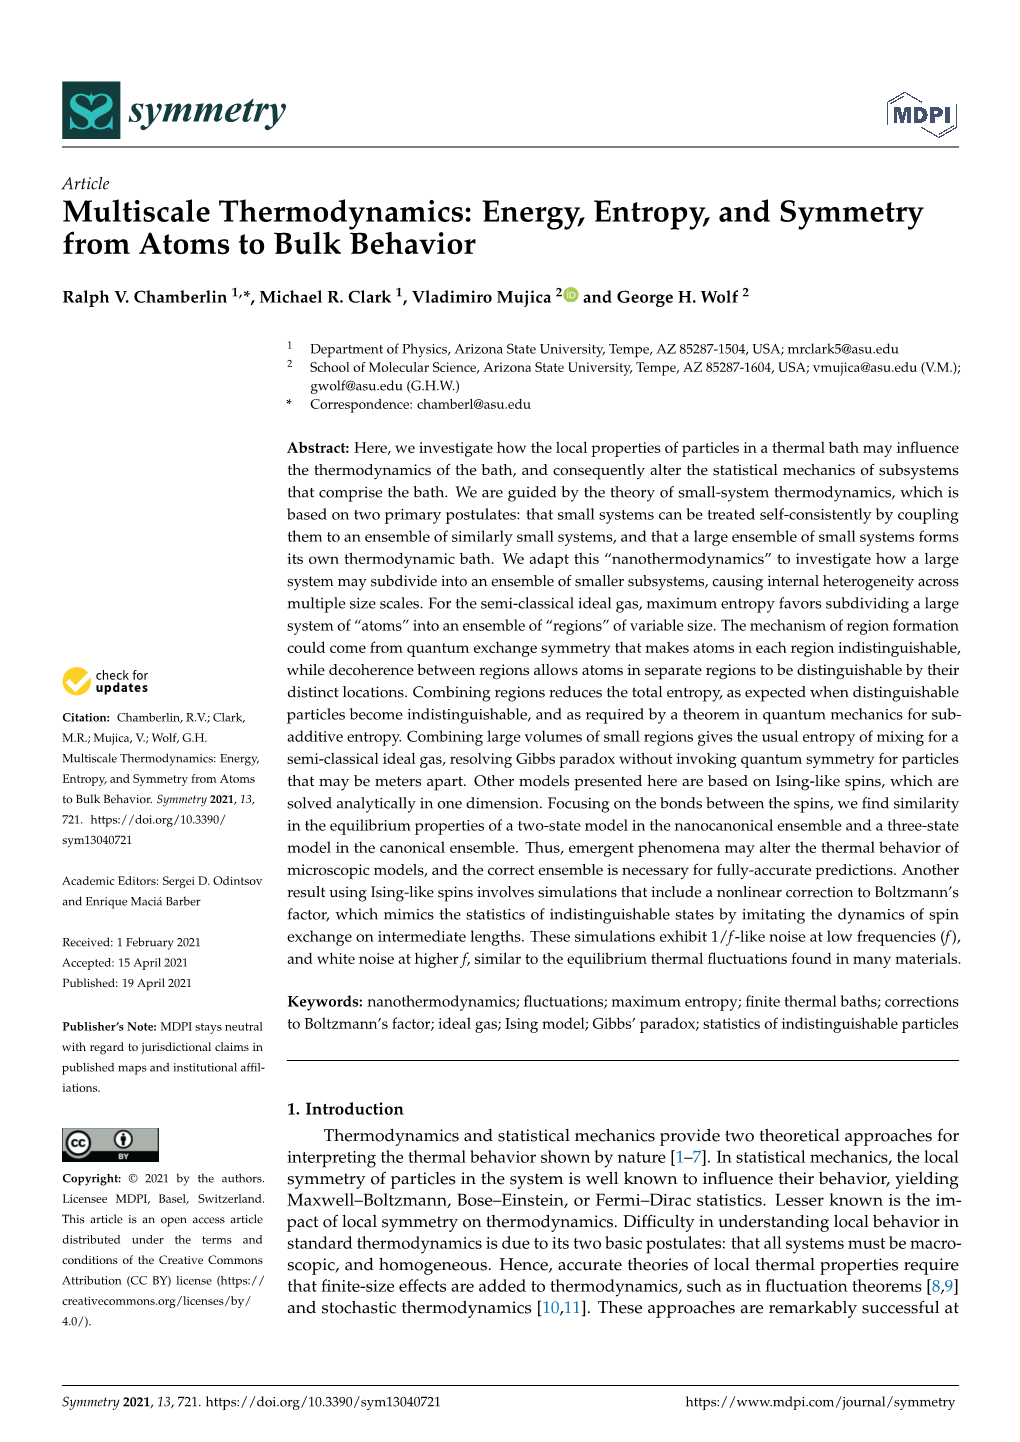 Energy, Entropy, and Symmetry from Atoms to Bulk Behavior